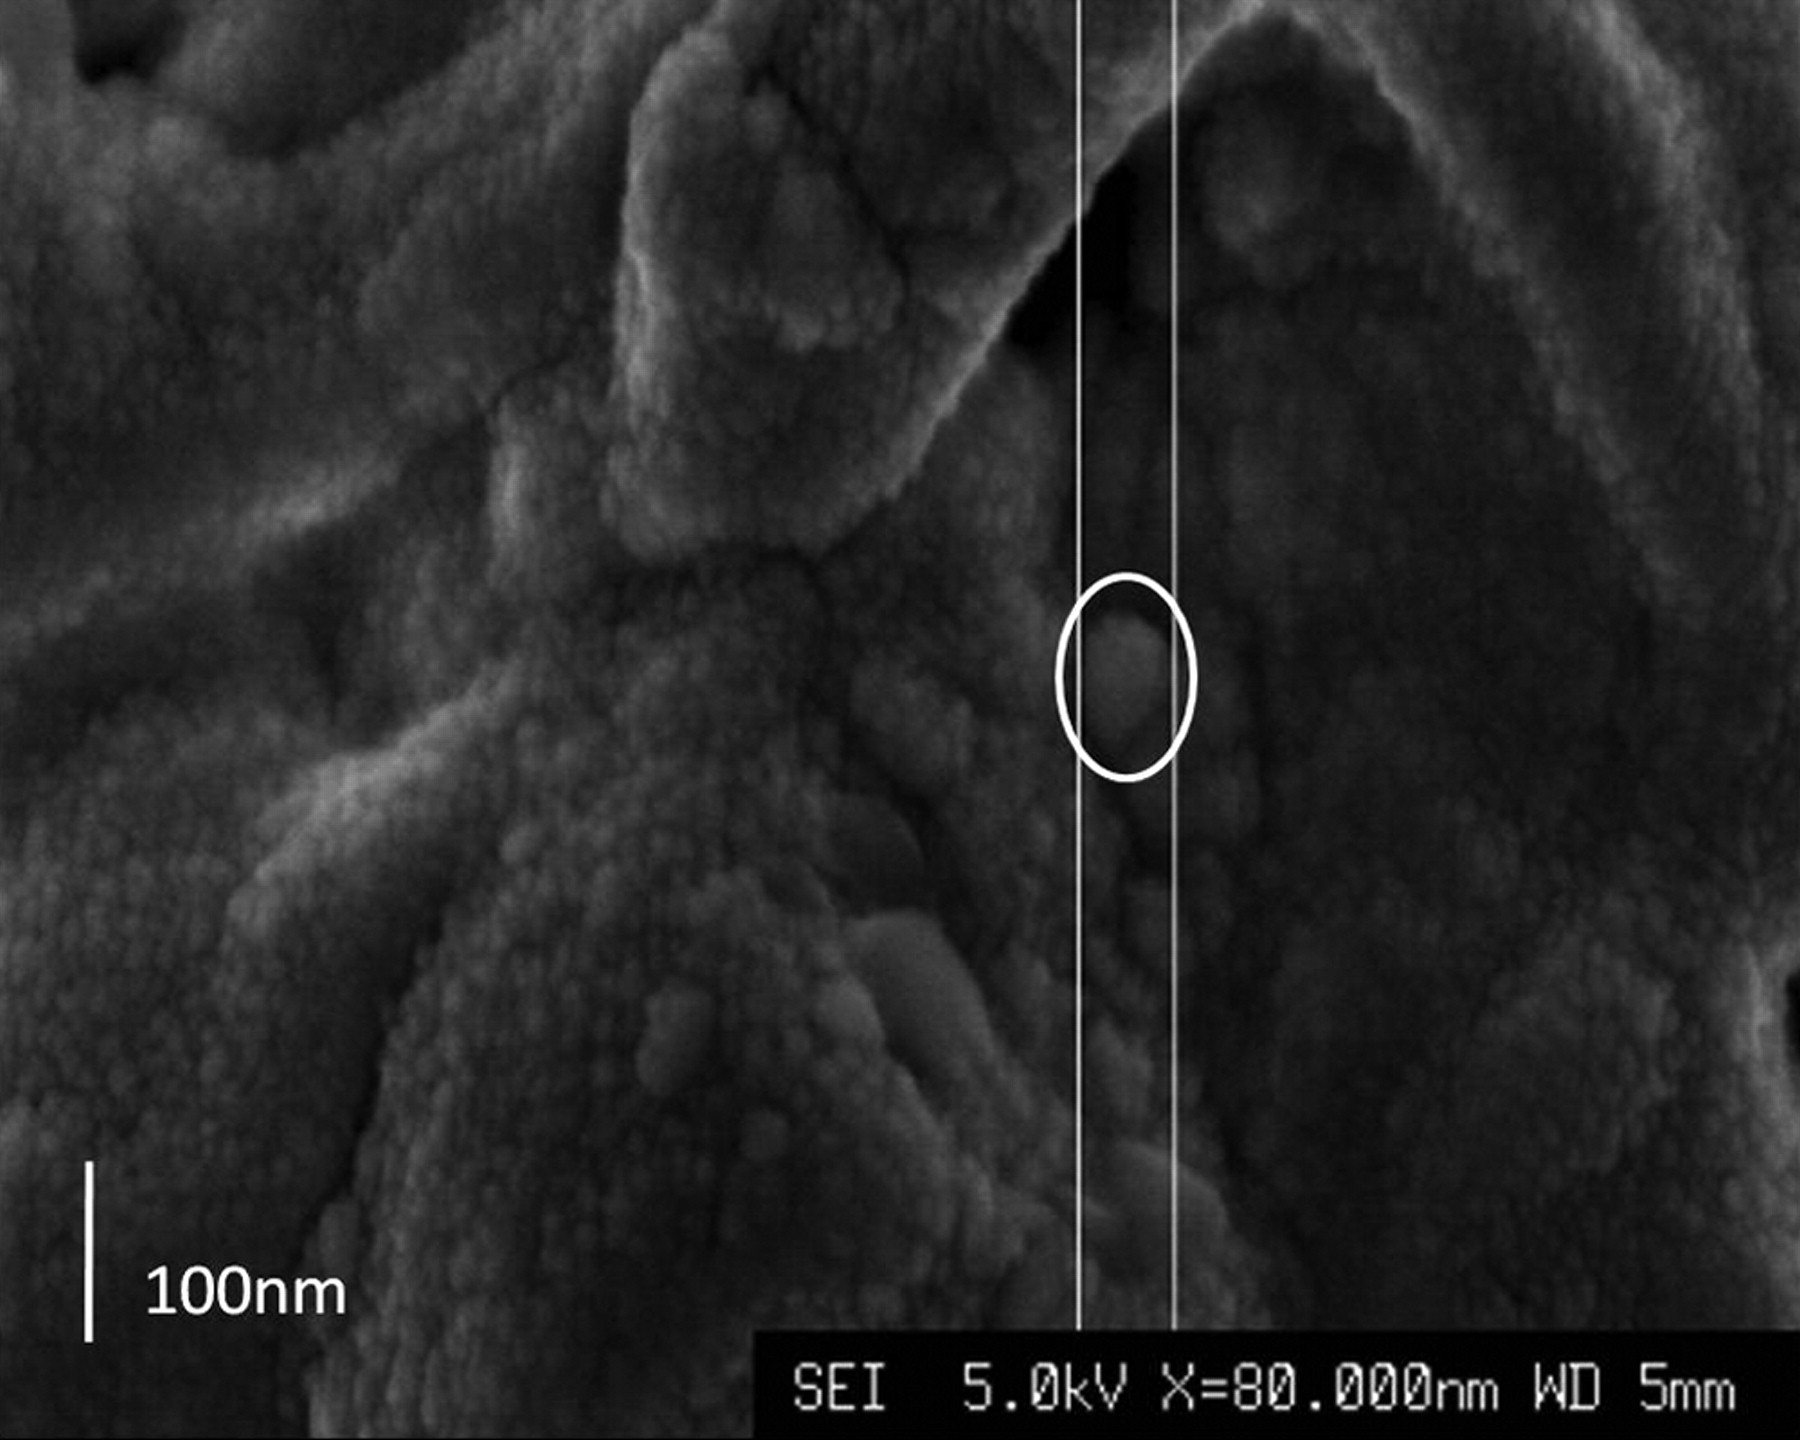 Figs. 2a - 2b 
            Scanning electron microscopy images
of α-tricalcium phosphate/poly(D,L-lactide-co-glycolide) (α-TCP/PLGA)
before hot-pressing at a) × 4500 magnification, showing pores (small
arrow) and α-TCP particles (large arrow), and b) at × 80 000 magnification, showing
an α-TCP particle (circled).
          